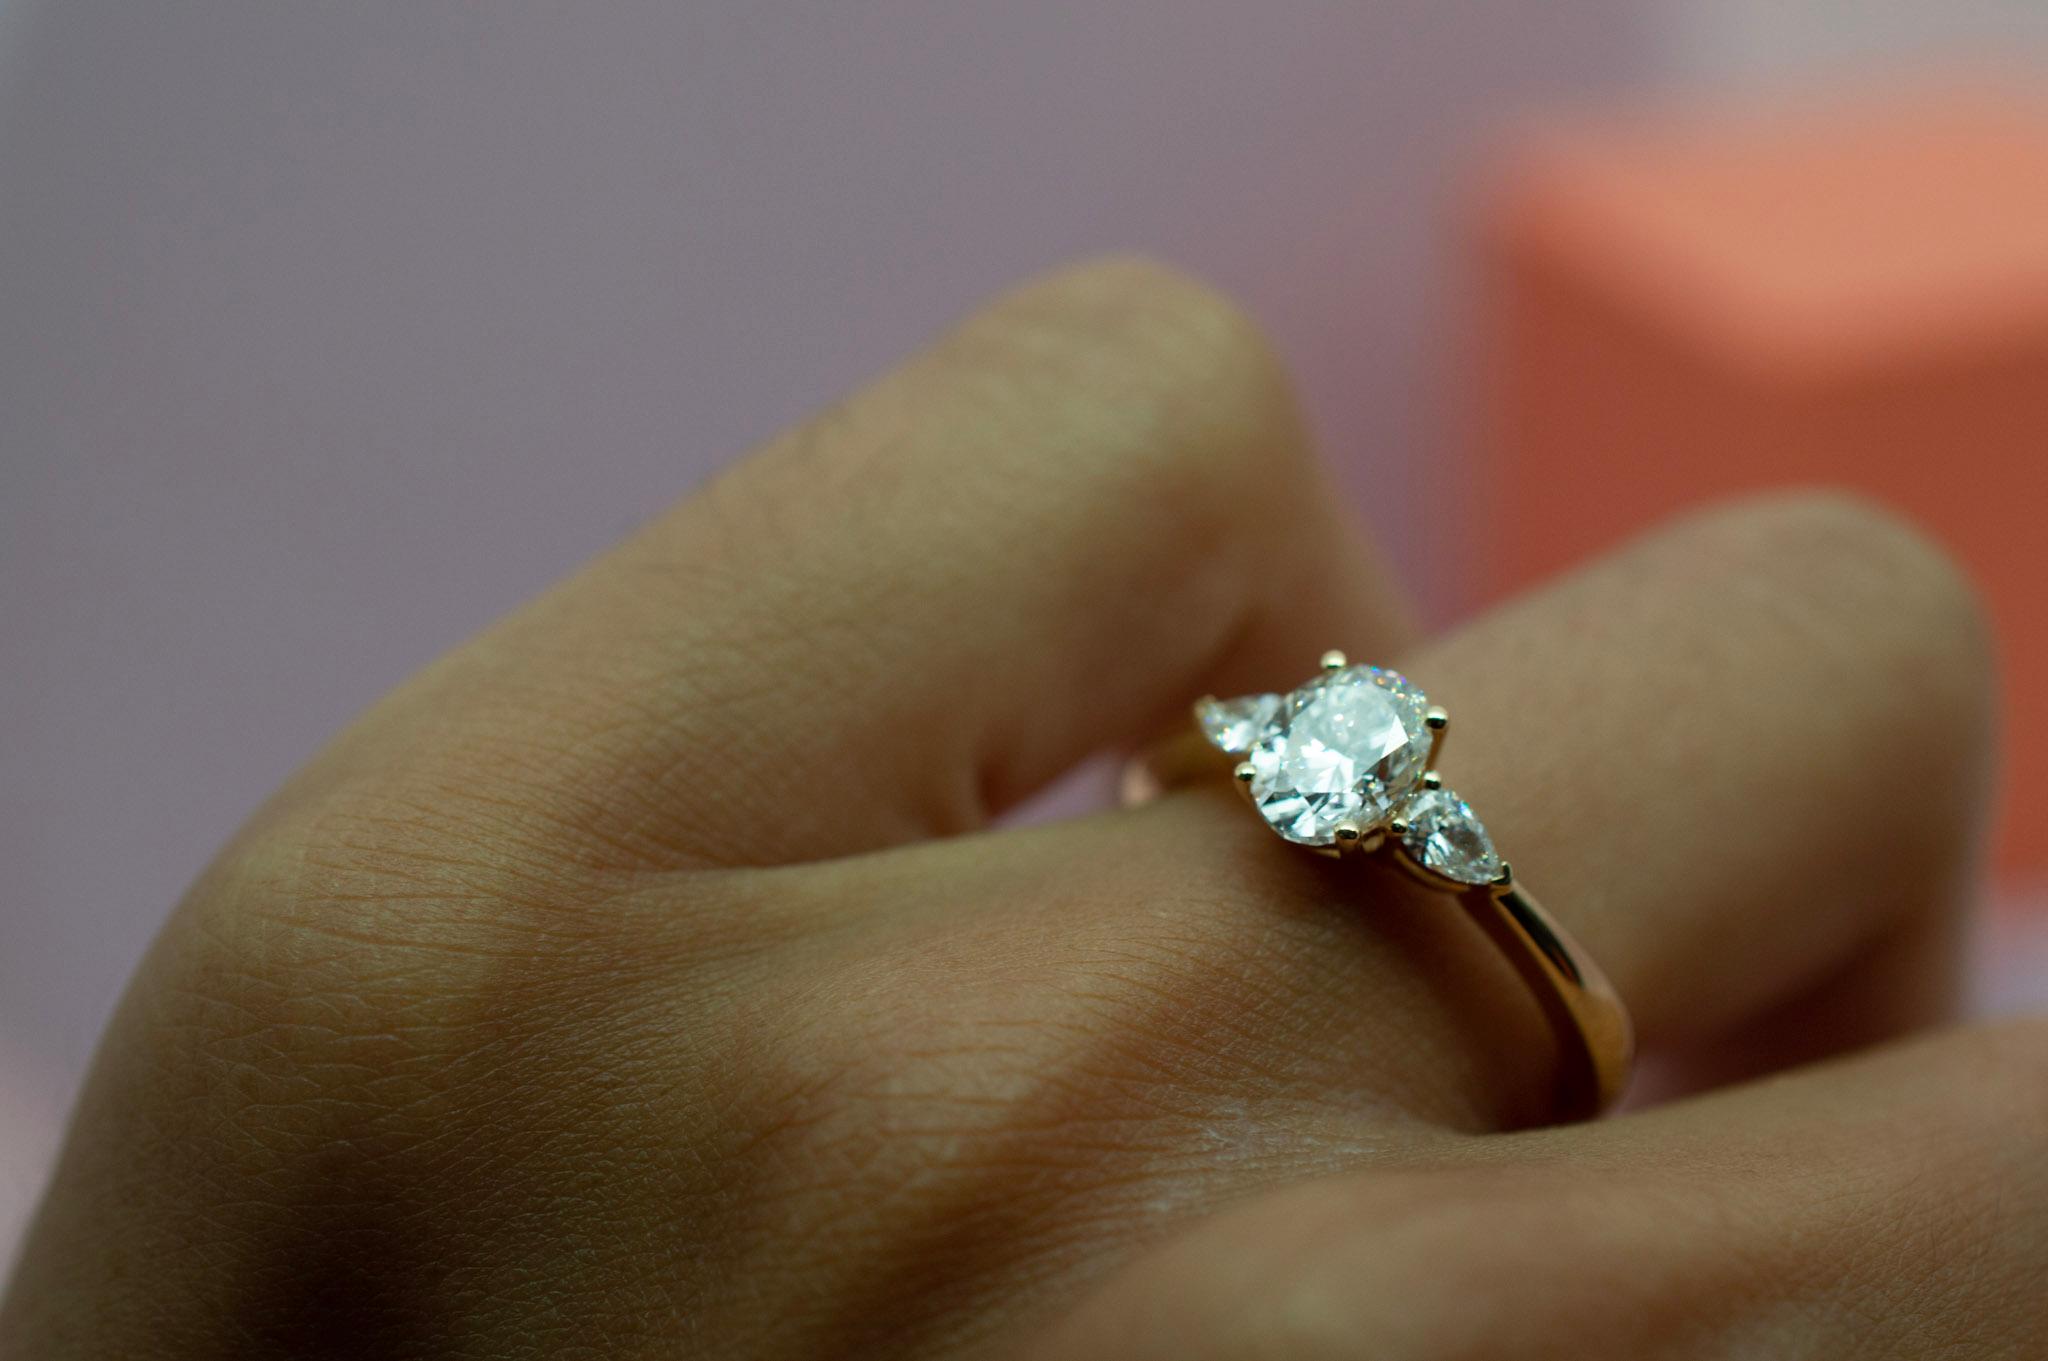 Oval Diamond Rings | How To Choose The Best One Cover Photo